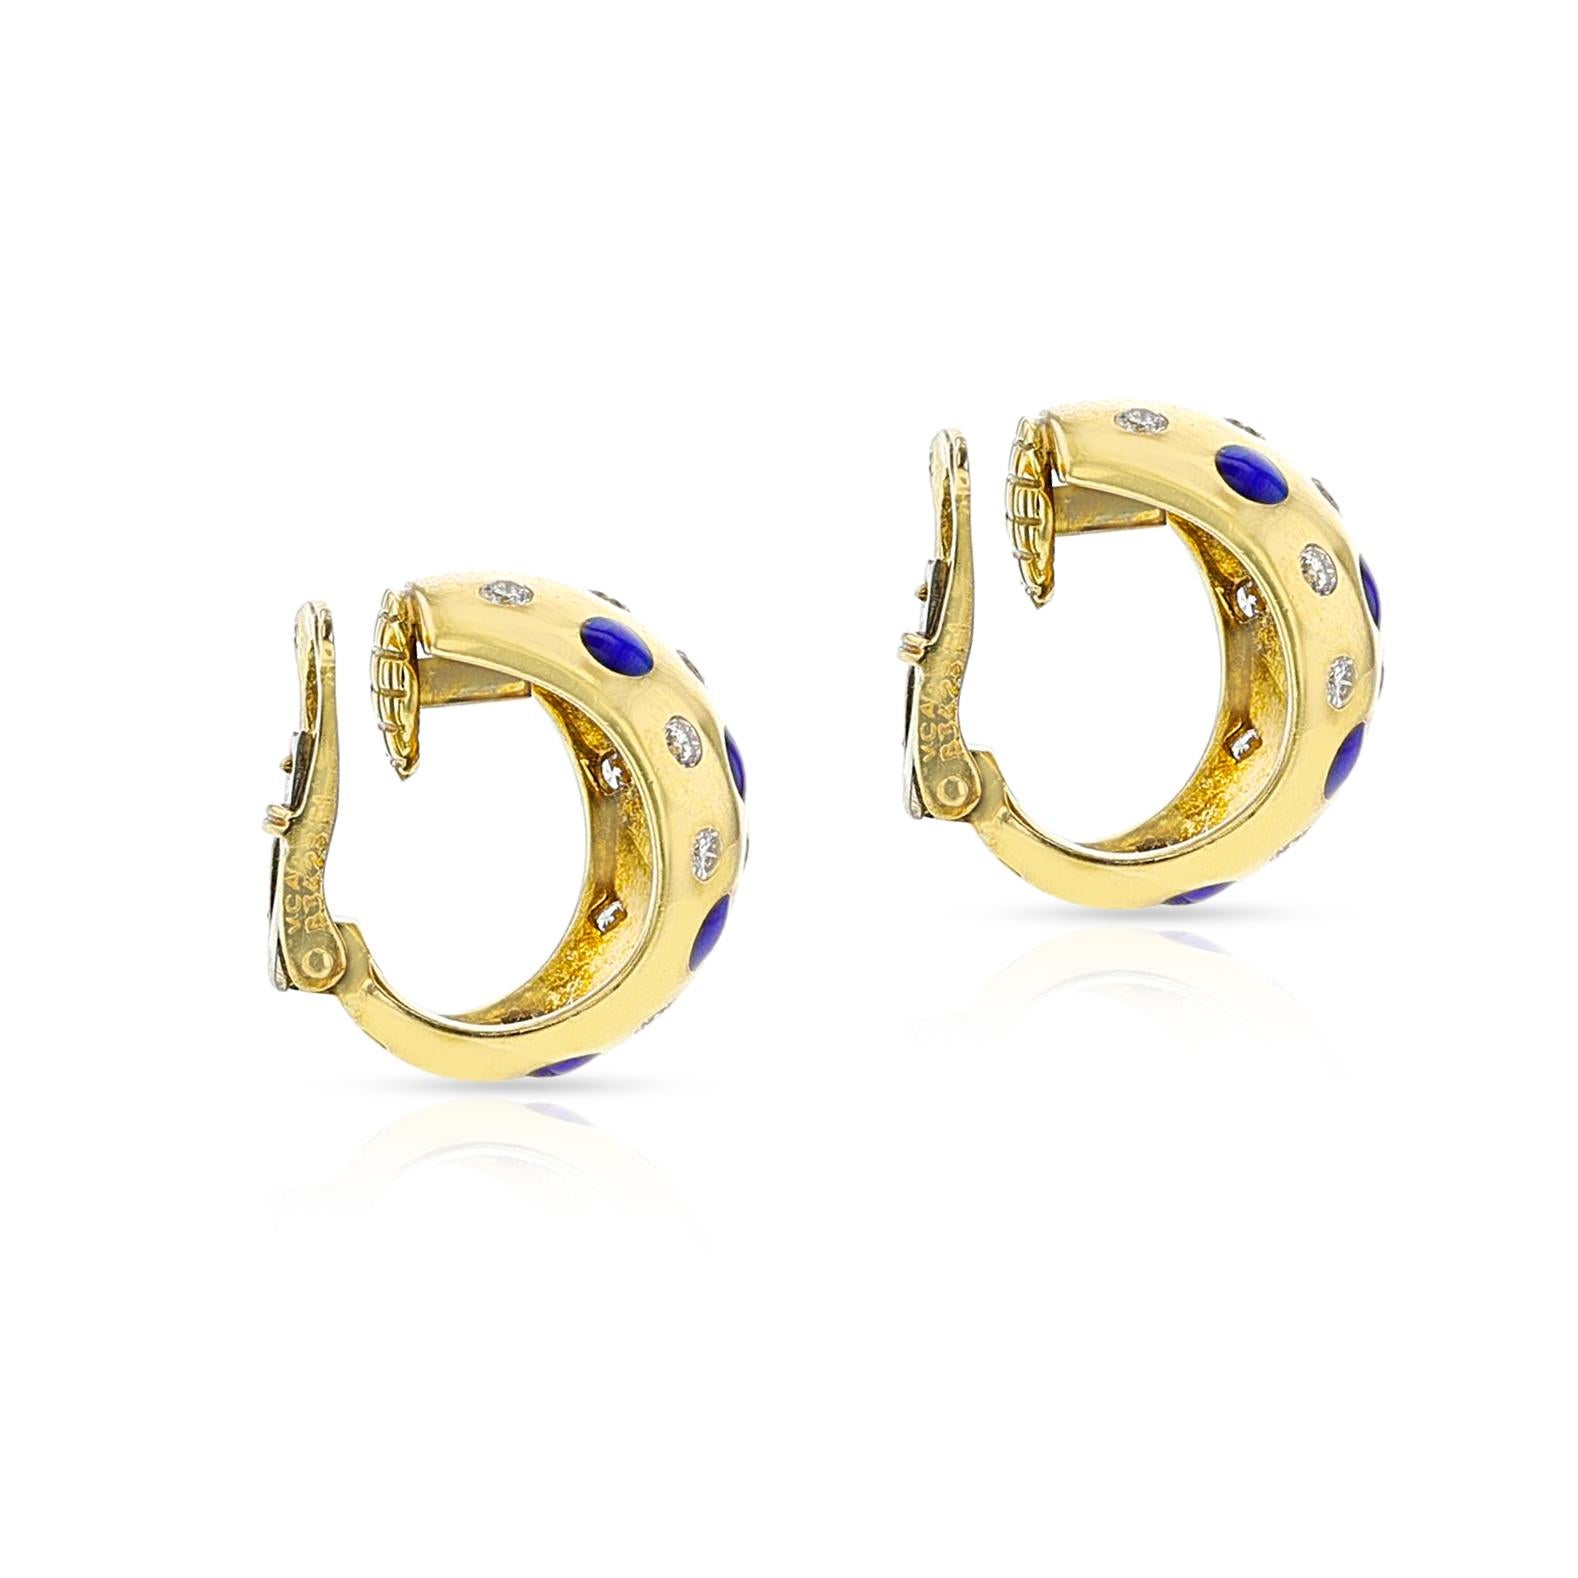 Women's or Men's Van Cleef & Arpels Plique a Jour Enamel and Diamond Earring and Ring Set, 18k For Sale